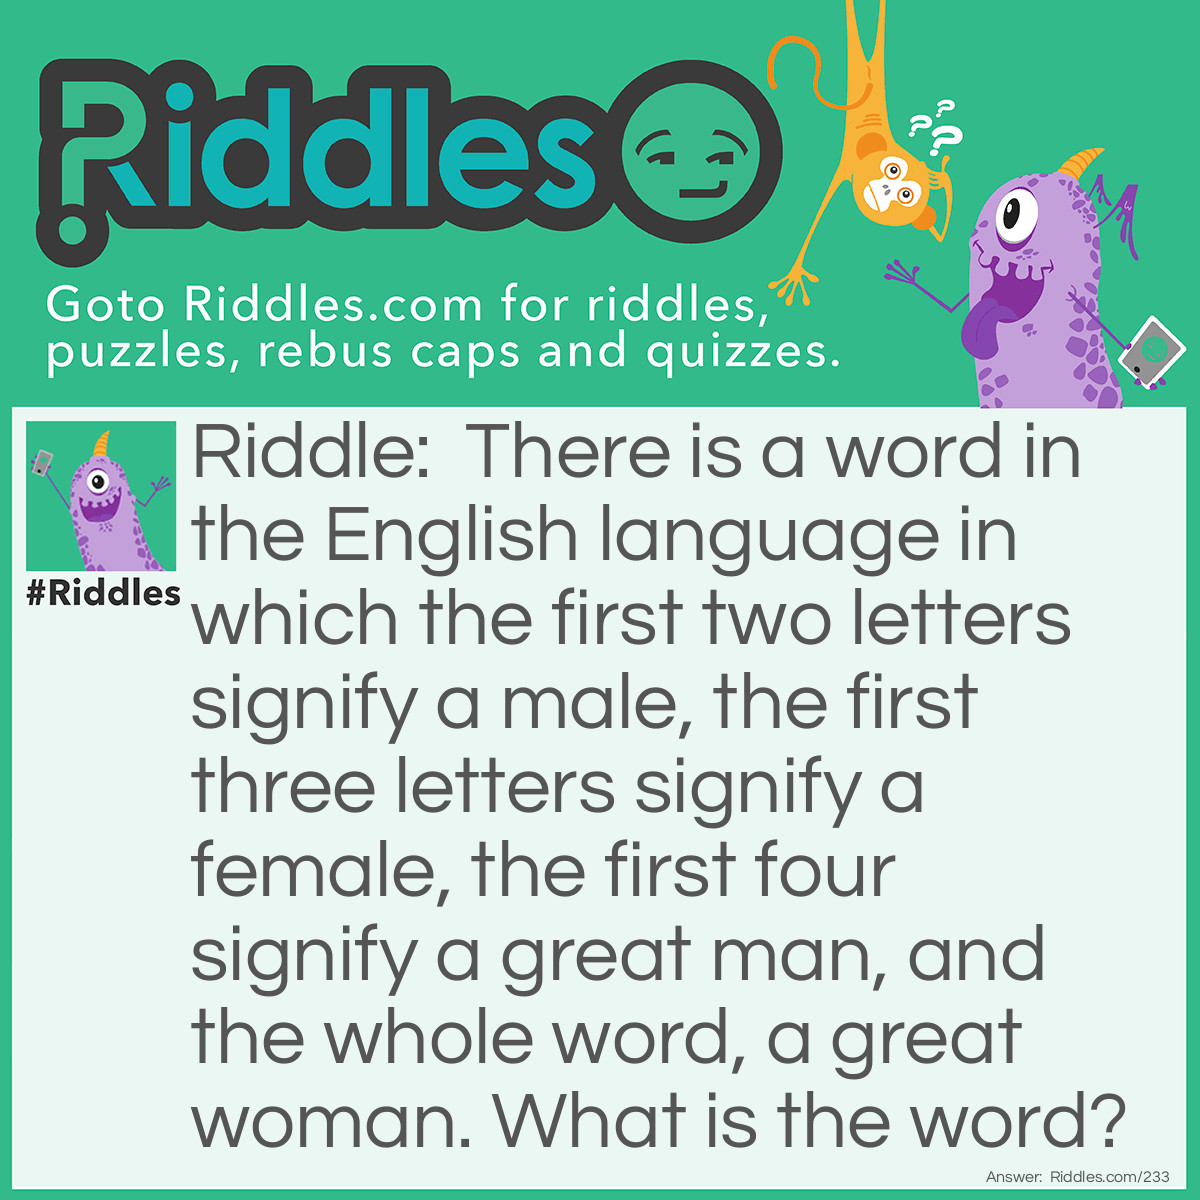 Riddle: There is a word in the English language in which the first two letters signify a male, the first three letters signify a female, the first four signify a <a href="/best-riddles">great</a> man, and the whole word, a great woman. What is the word? Answer: Heroine.